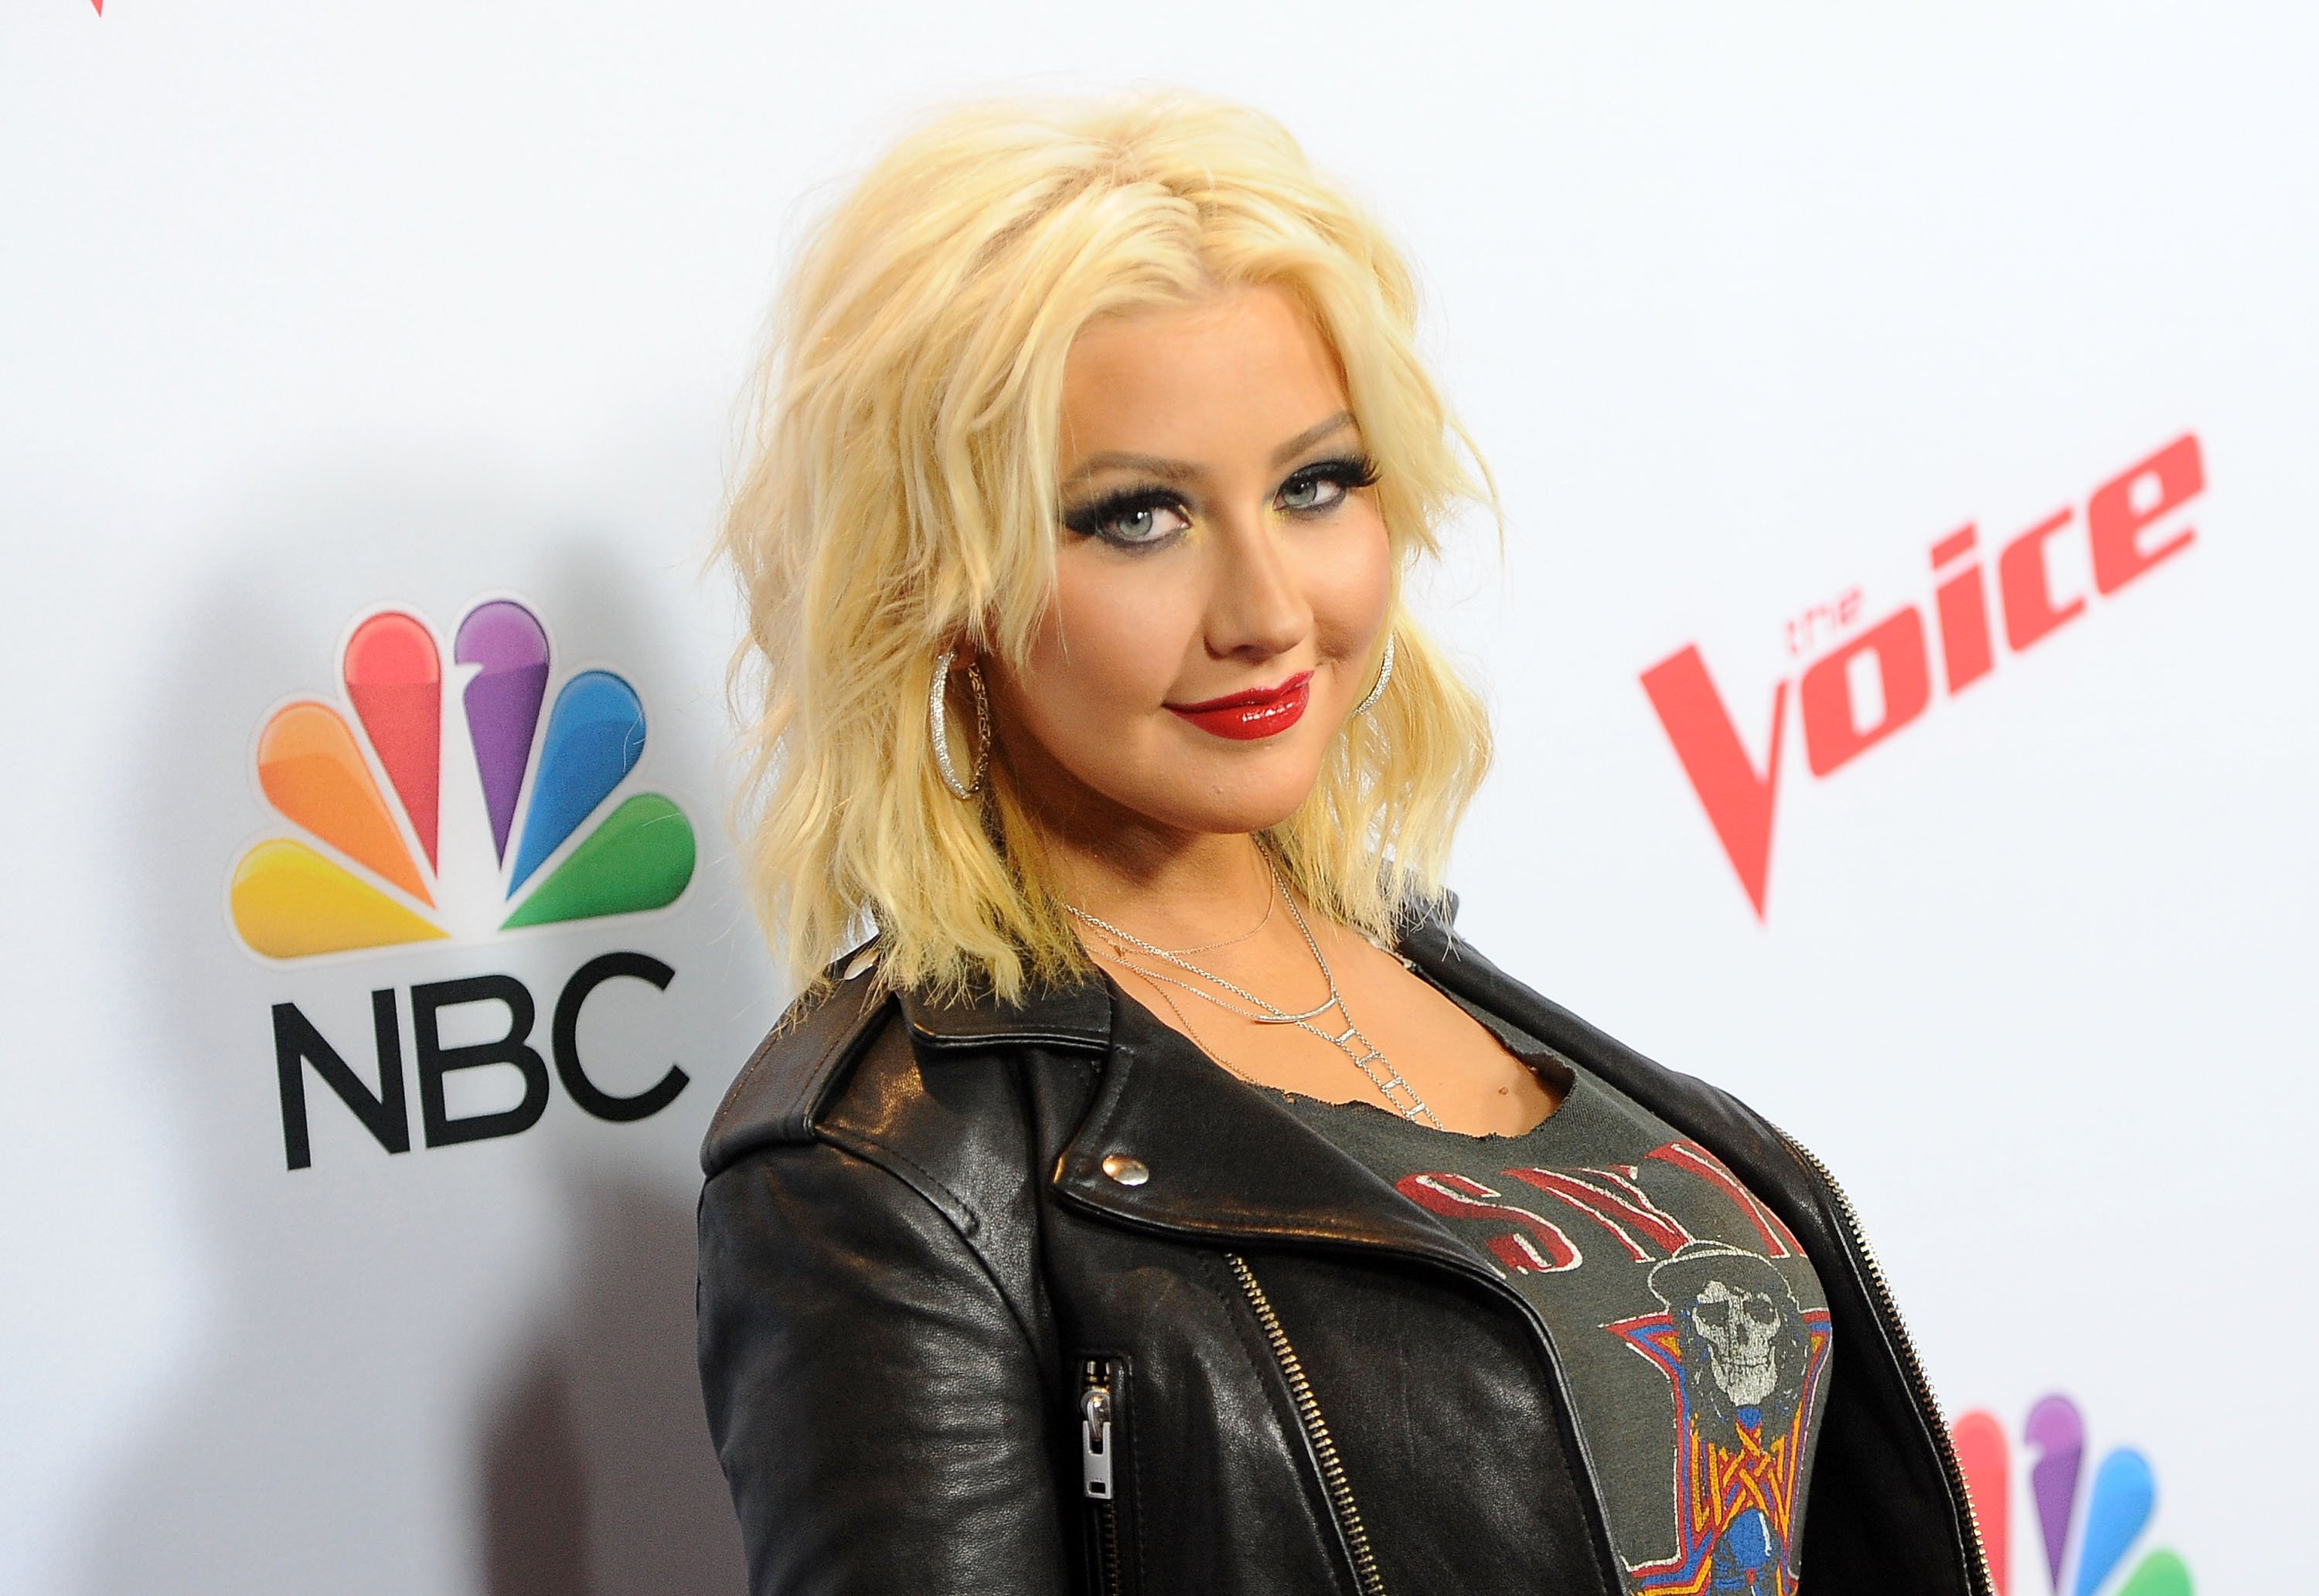 Christina Aguilera arrives at NBC's "The Voice" Season 8 red carpet event at Pacific Design Center on April 23, 2015 | Photo: GettyImages